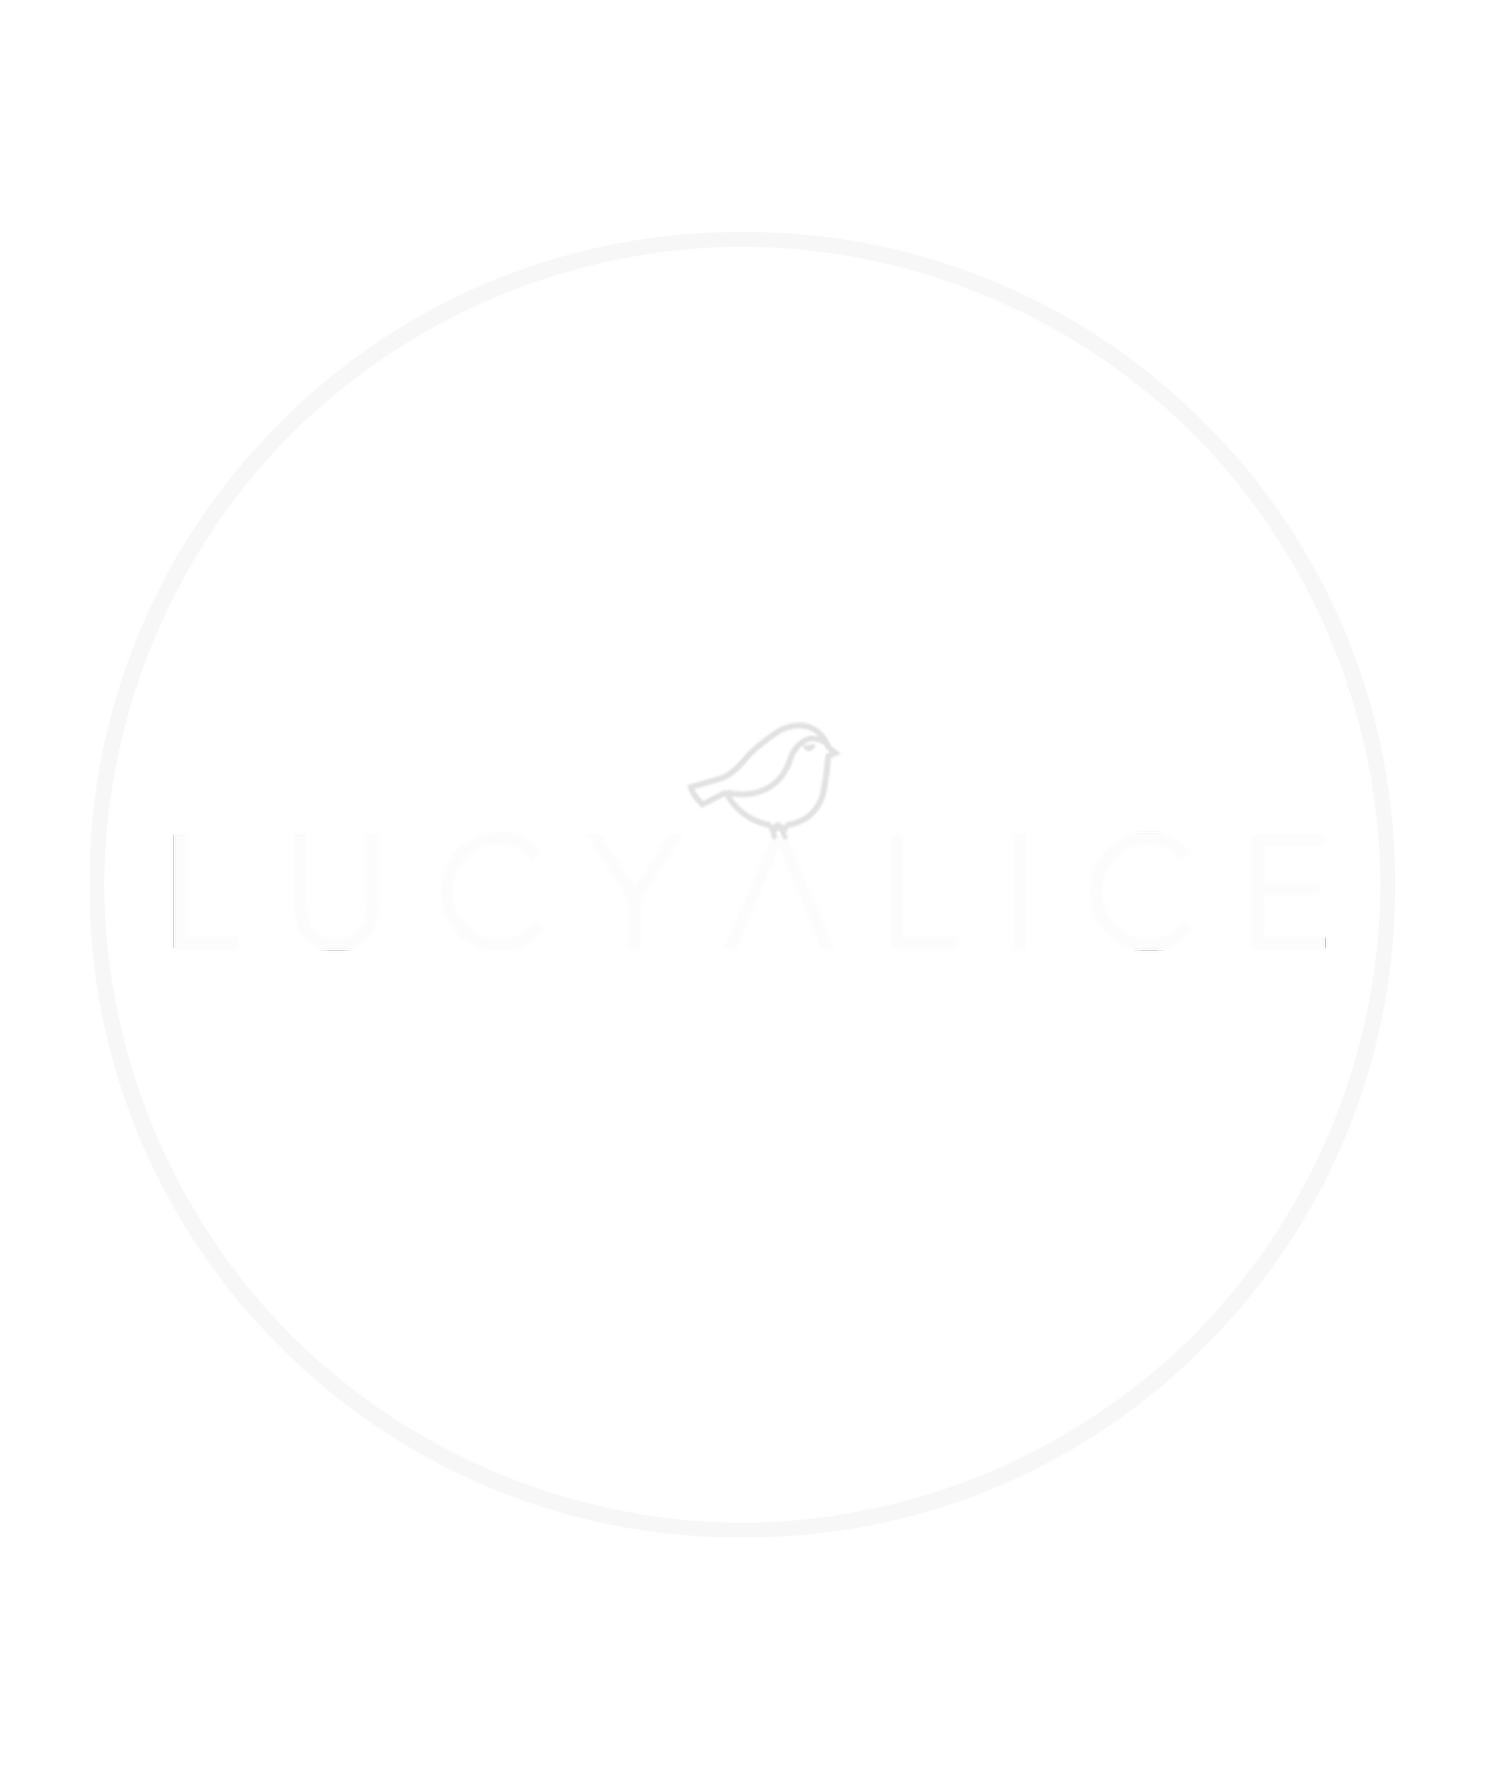 LUCY ALICE DESIGNS